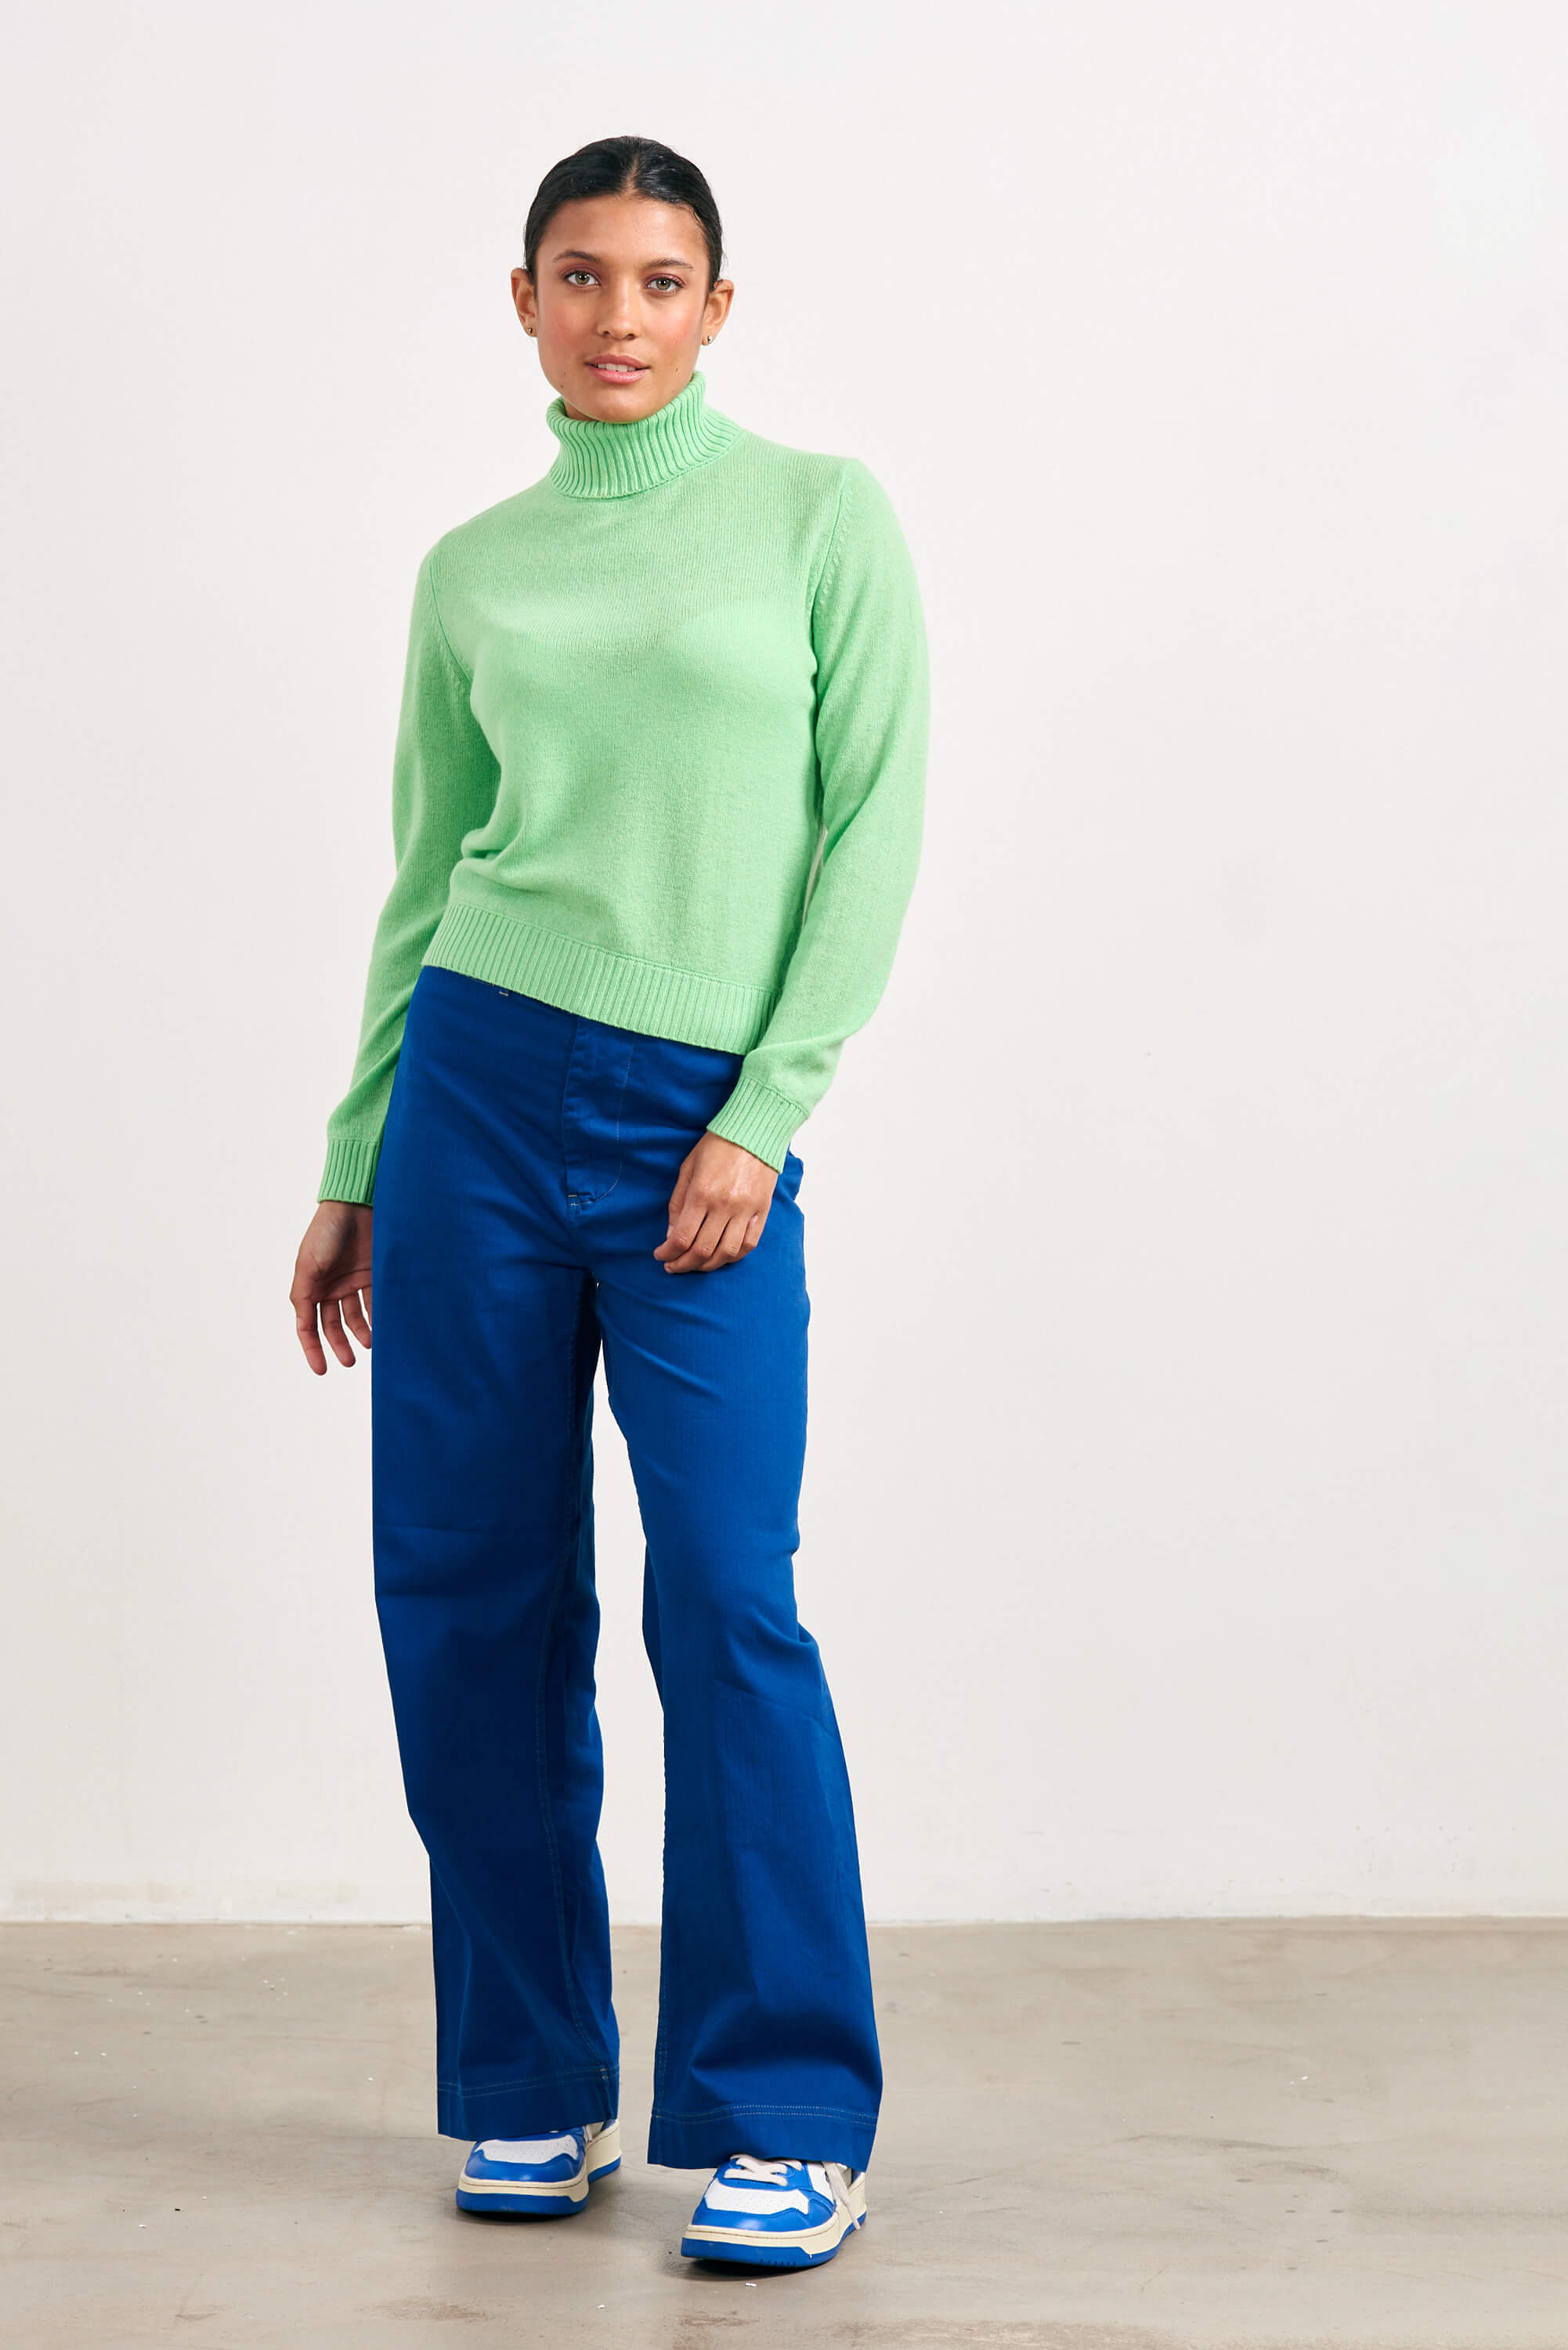 Brown haired female model wearing Jumper1234 lightweight cashmere roll neck in apple green 